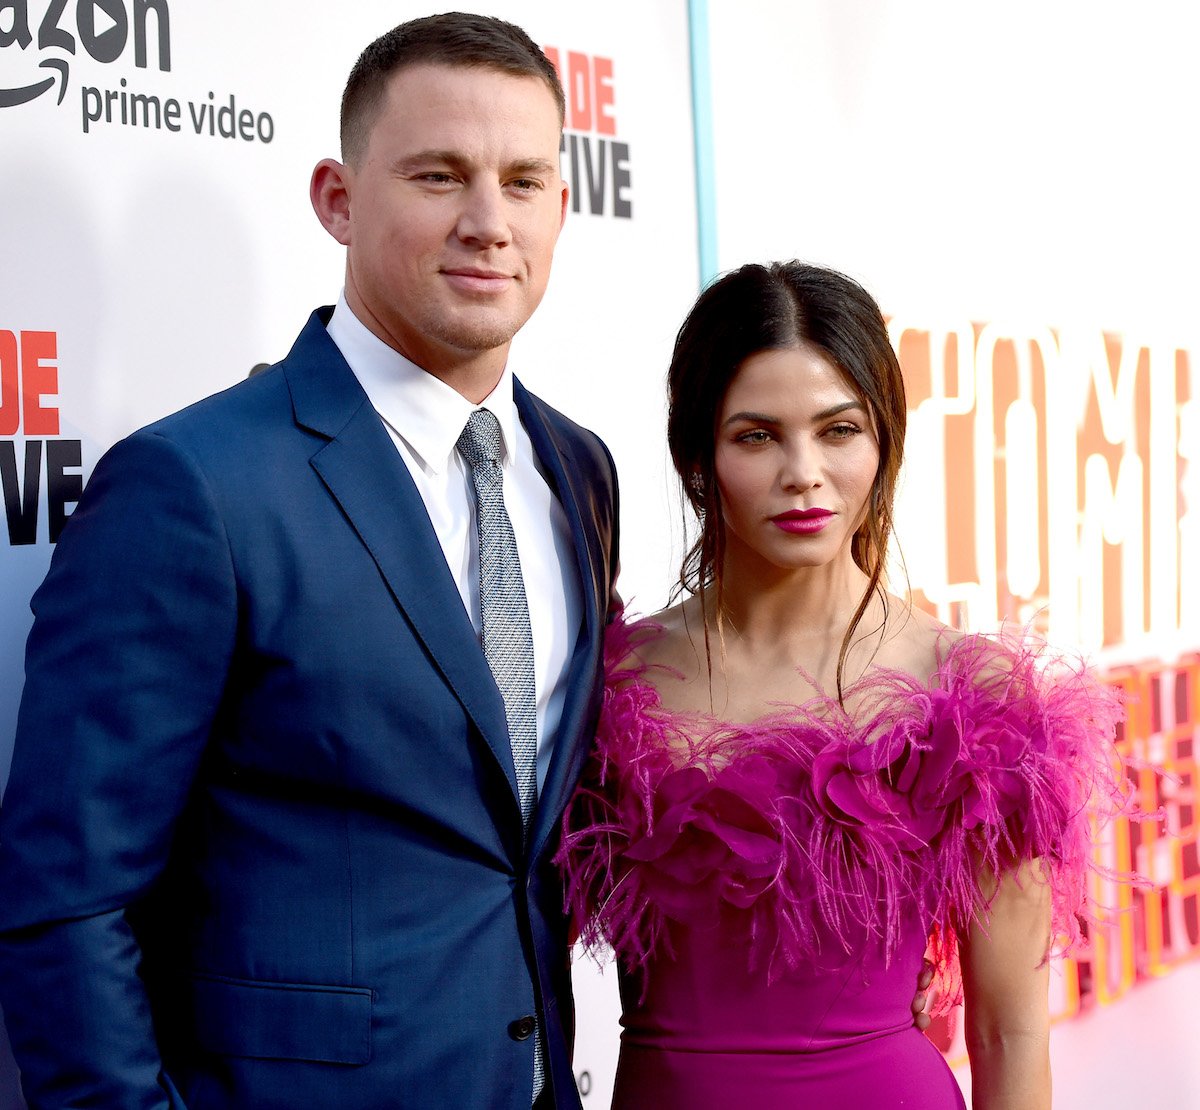 Actor Channing Tatum and his wife Jenna Dewan Tatum arrive at the premiere of Amazon's "Comrade Detective" in 2017